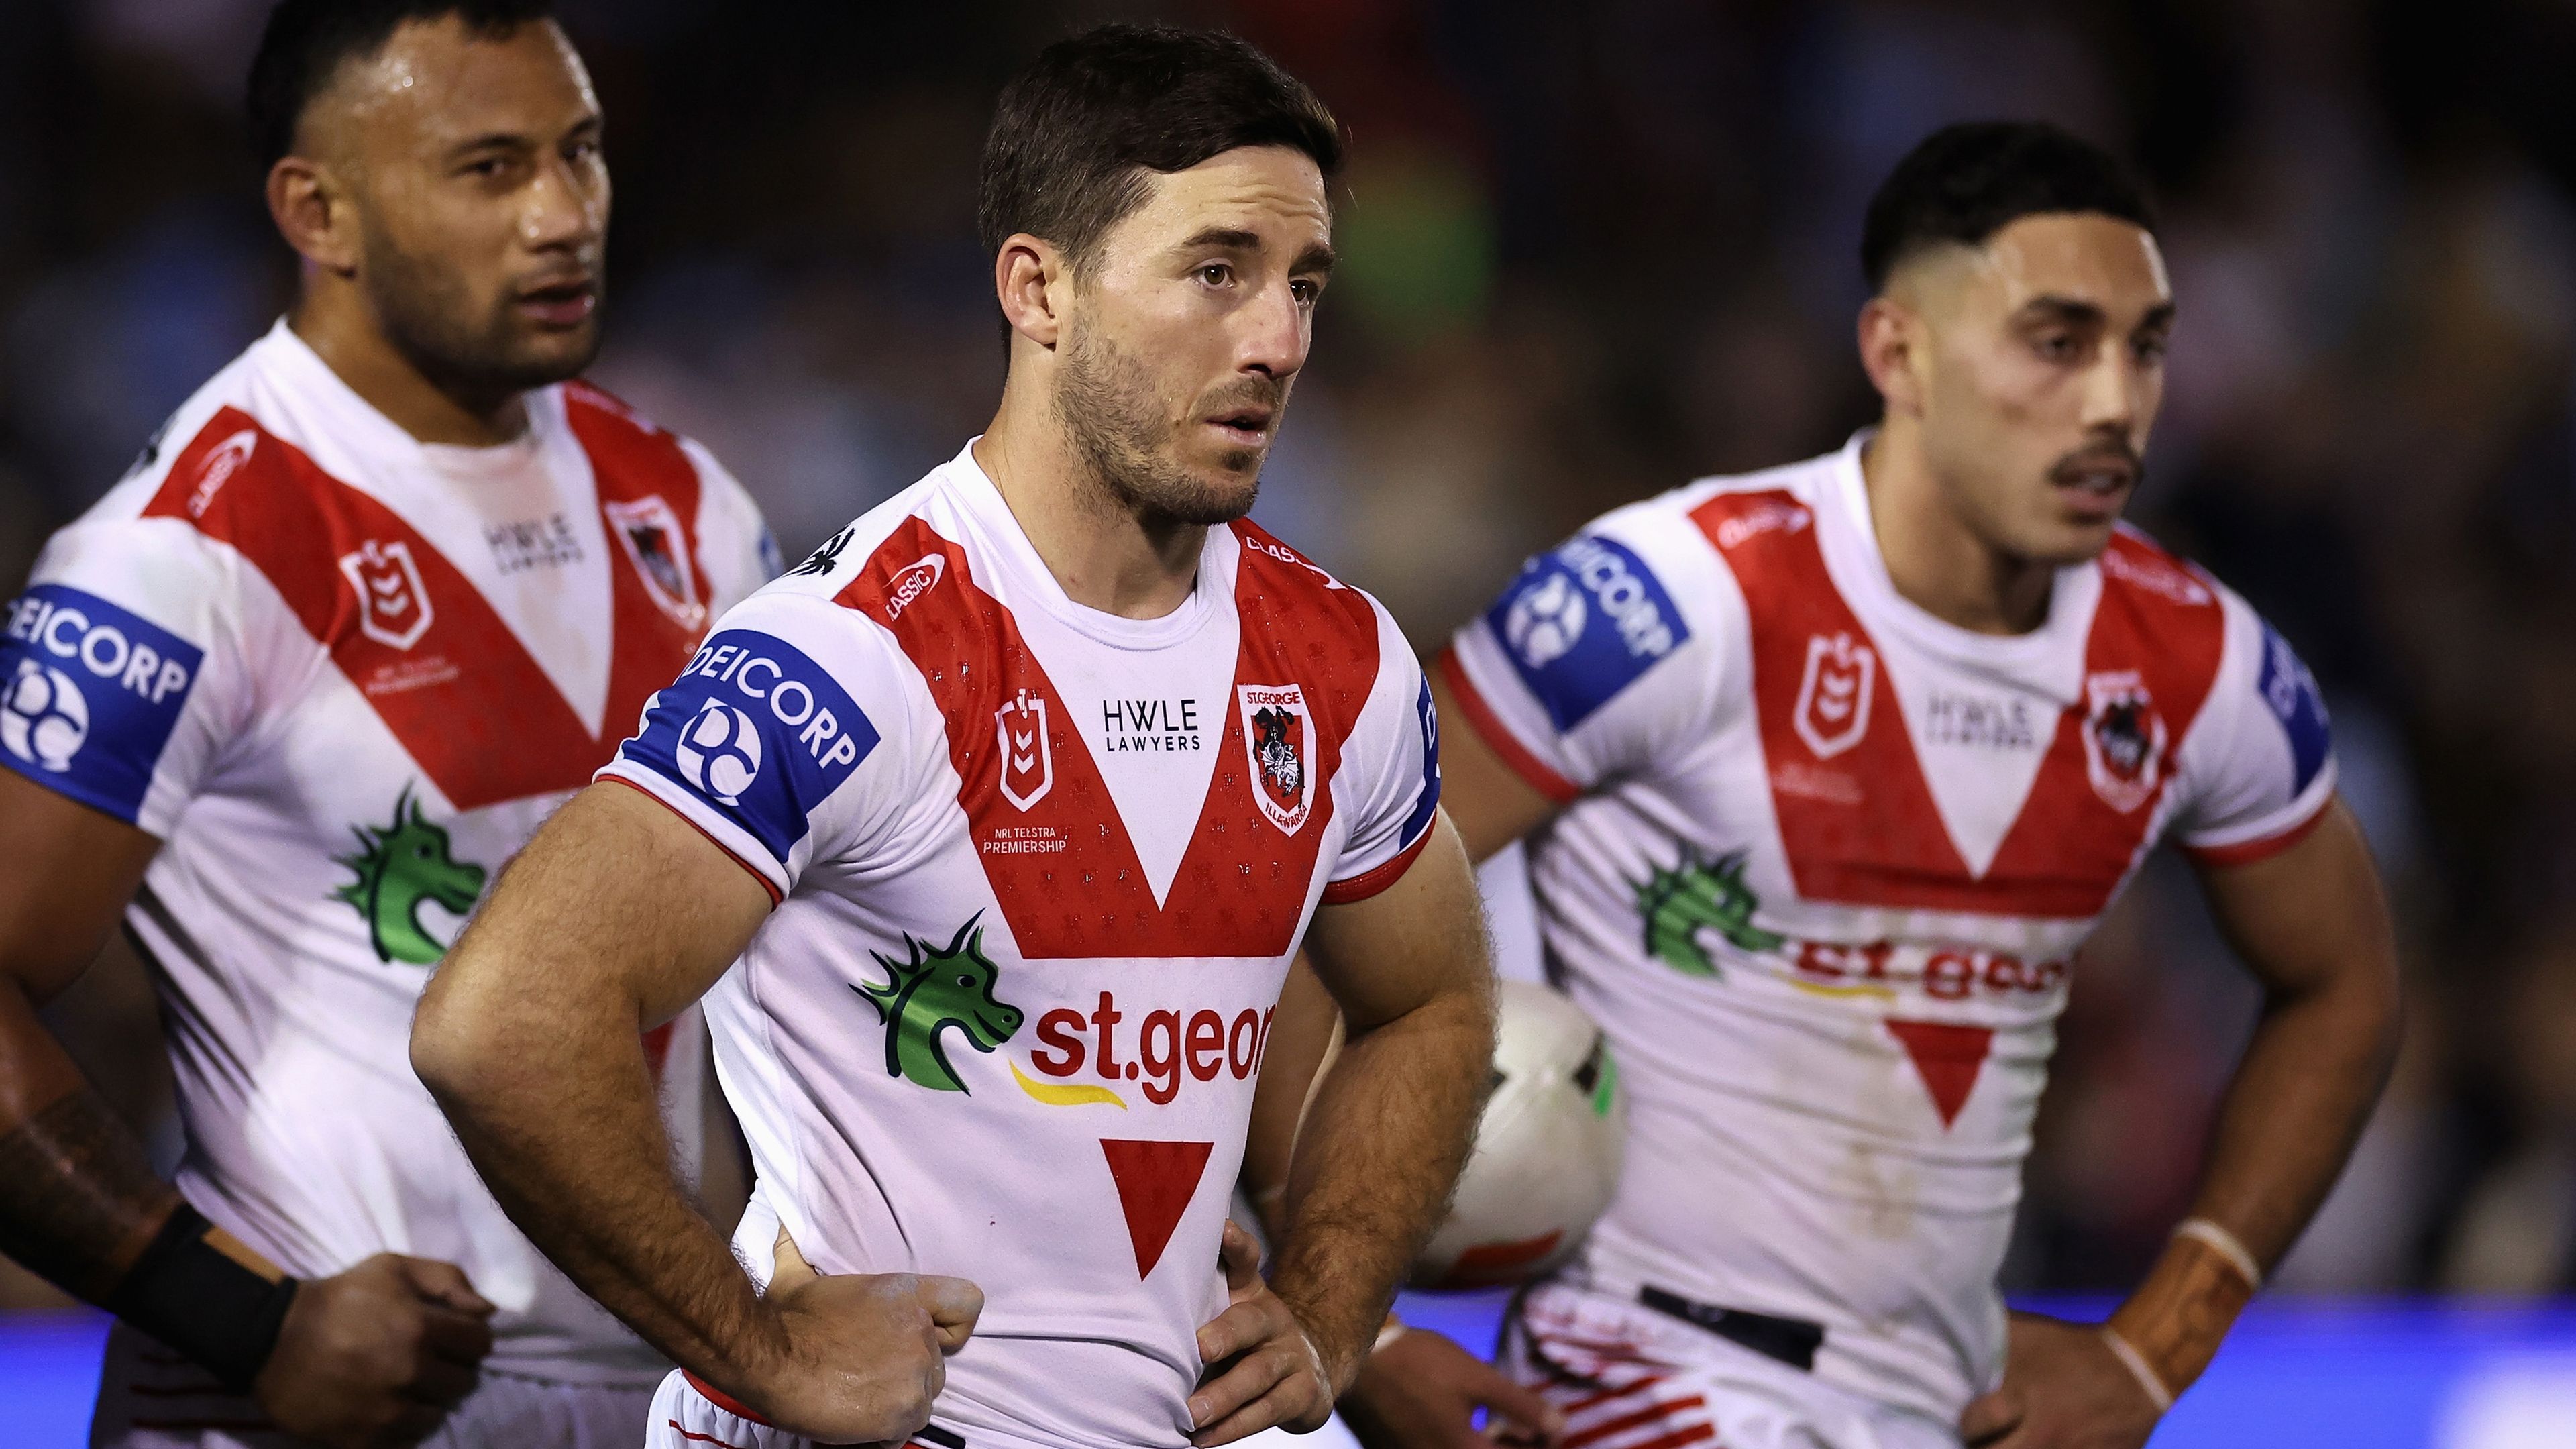 'Any team': Ben Hunt quizzed on hopes for Queensland move as Dragons future darkens